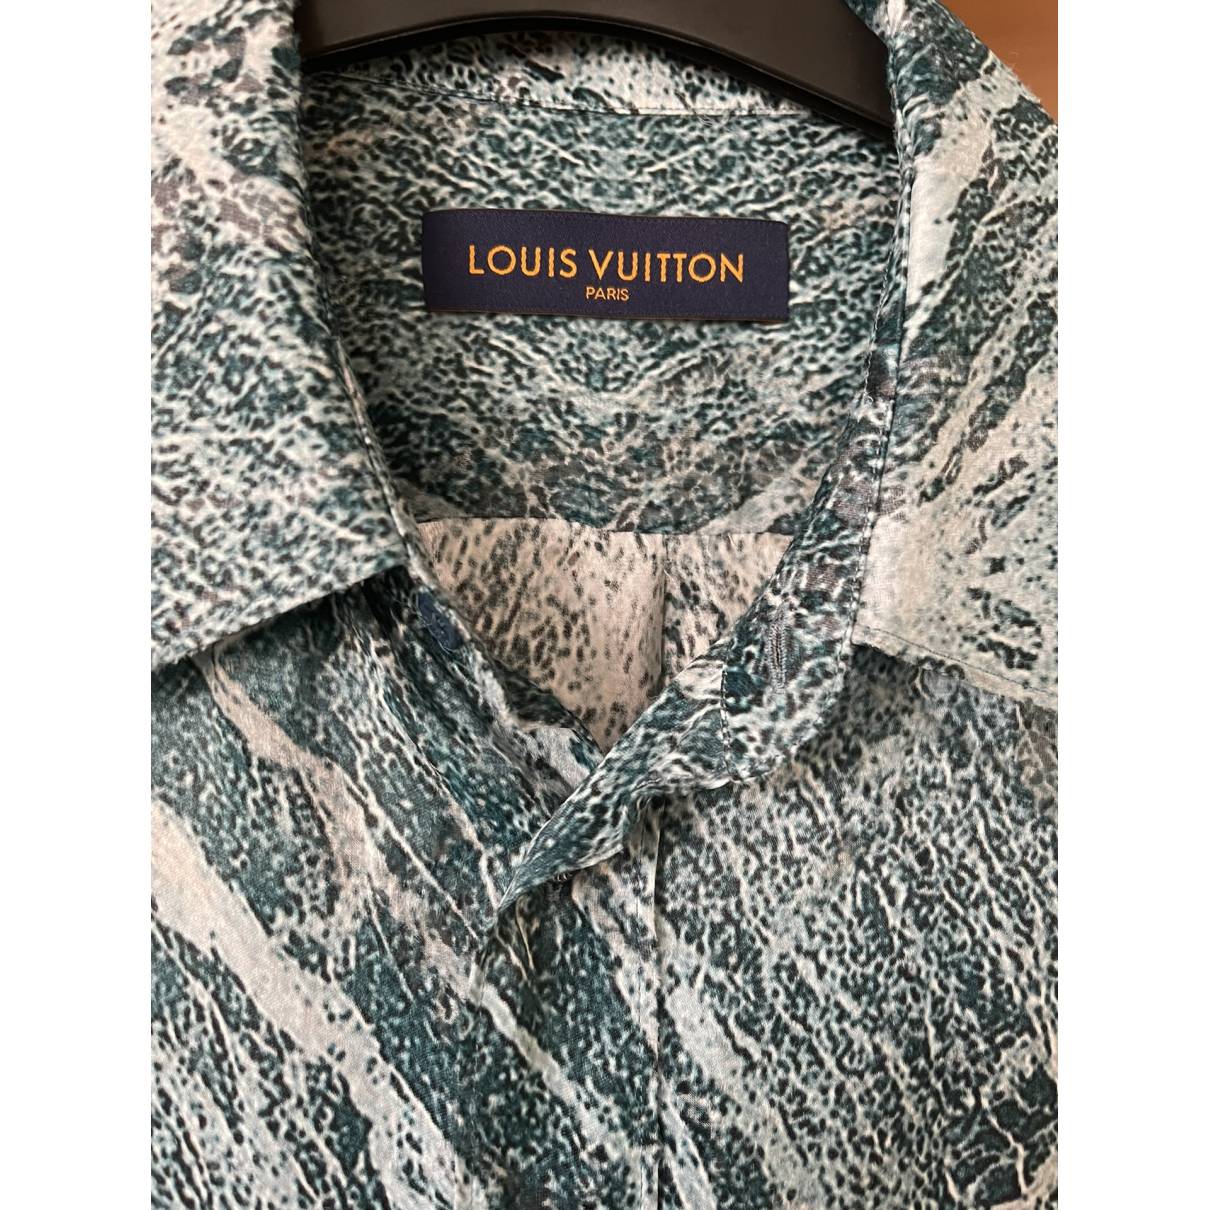 Louis Vuitton - Authenticated Shirt - Viscose Turquoise for Men, Never Worn